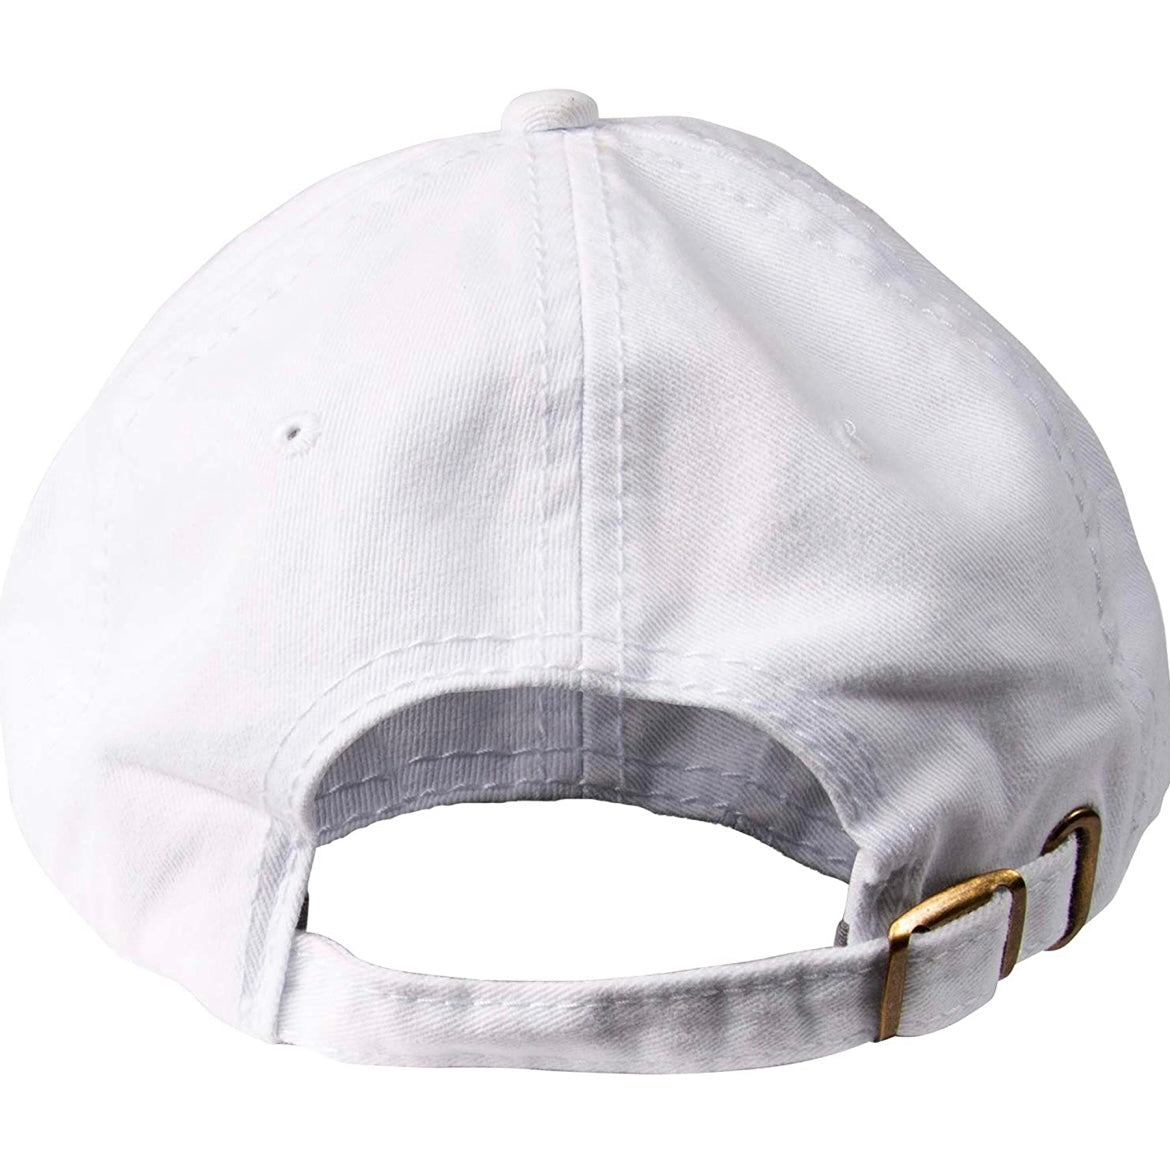 Camping People Adjustable Hat